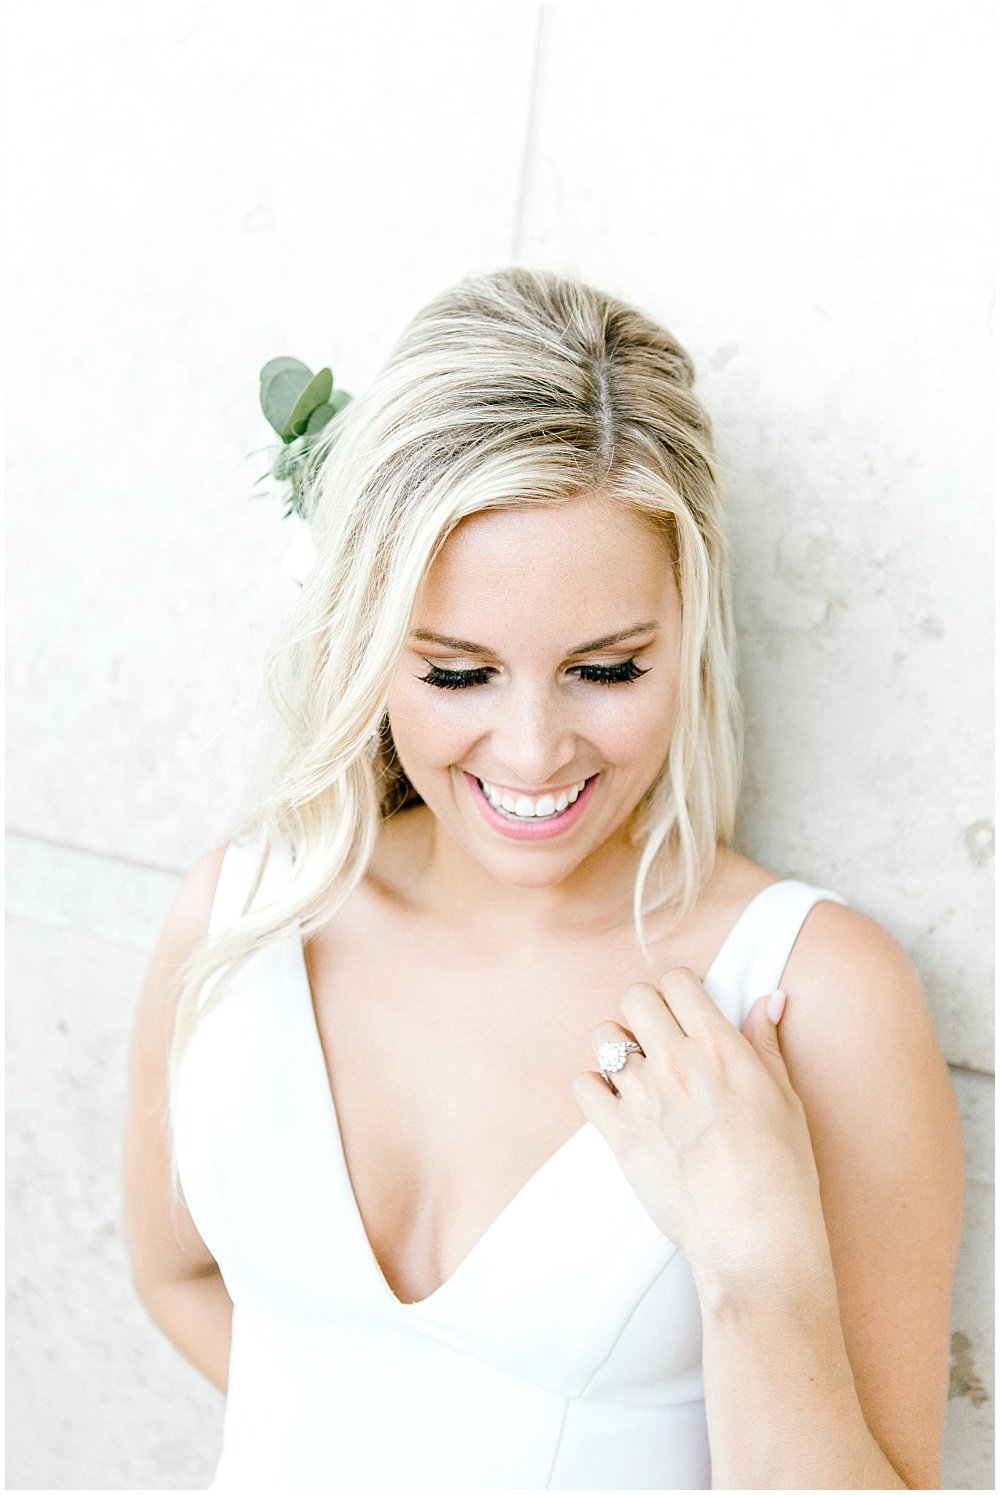 NFL-Player-Nick-Martin-Indianapolis-Indiana-Wedding-The-Knot-Featured-Jessica-Dum-Wedding-Coordination-photo__0016